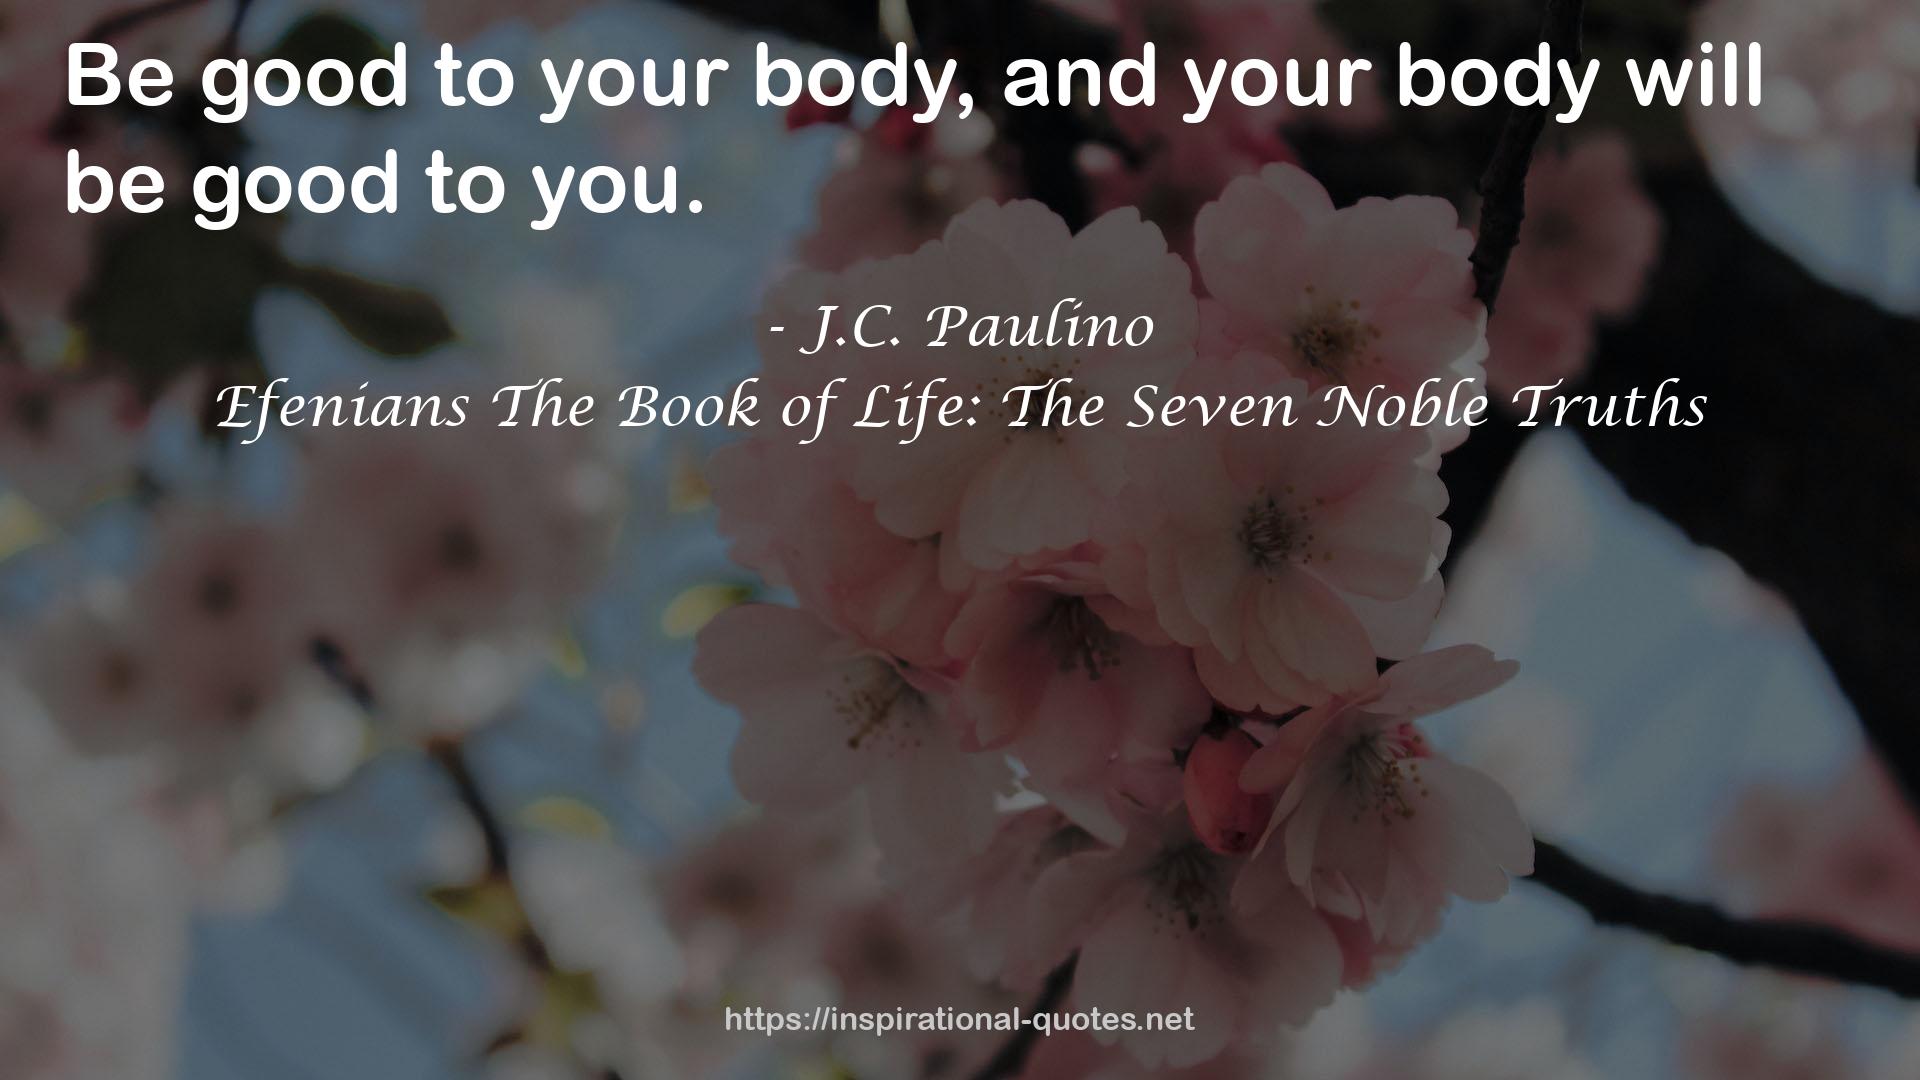 Efenians The Book of Life: The Seven Noble Truths QUOTES